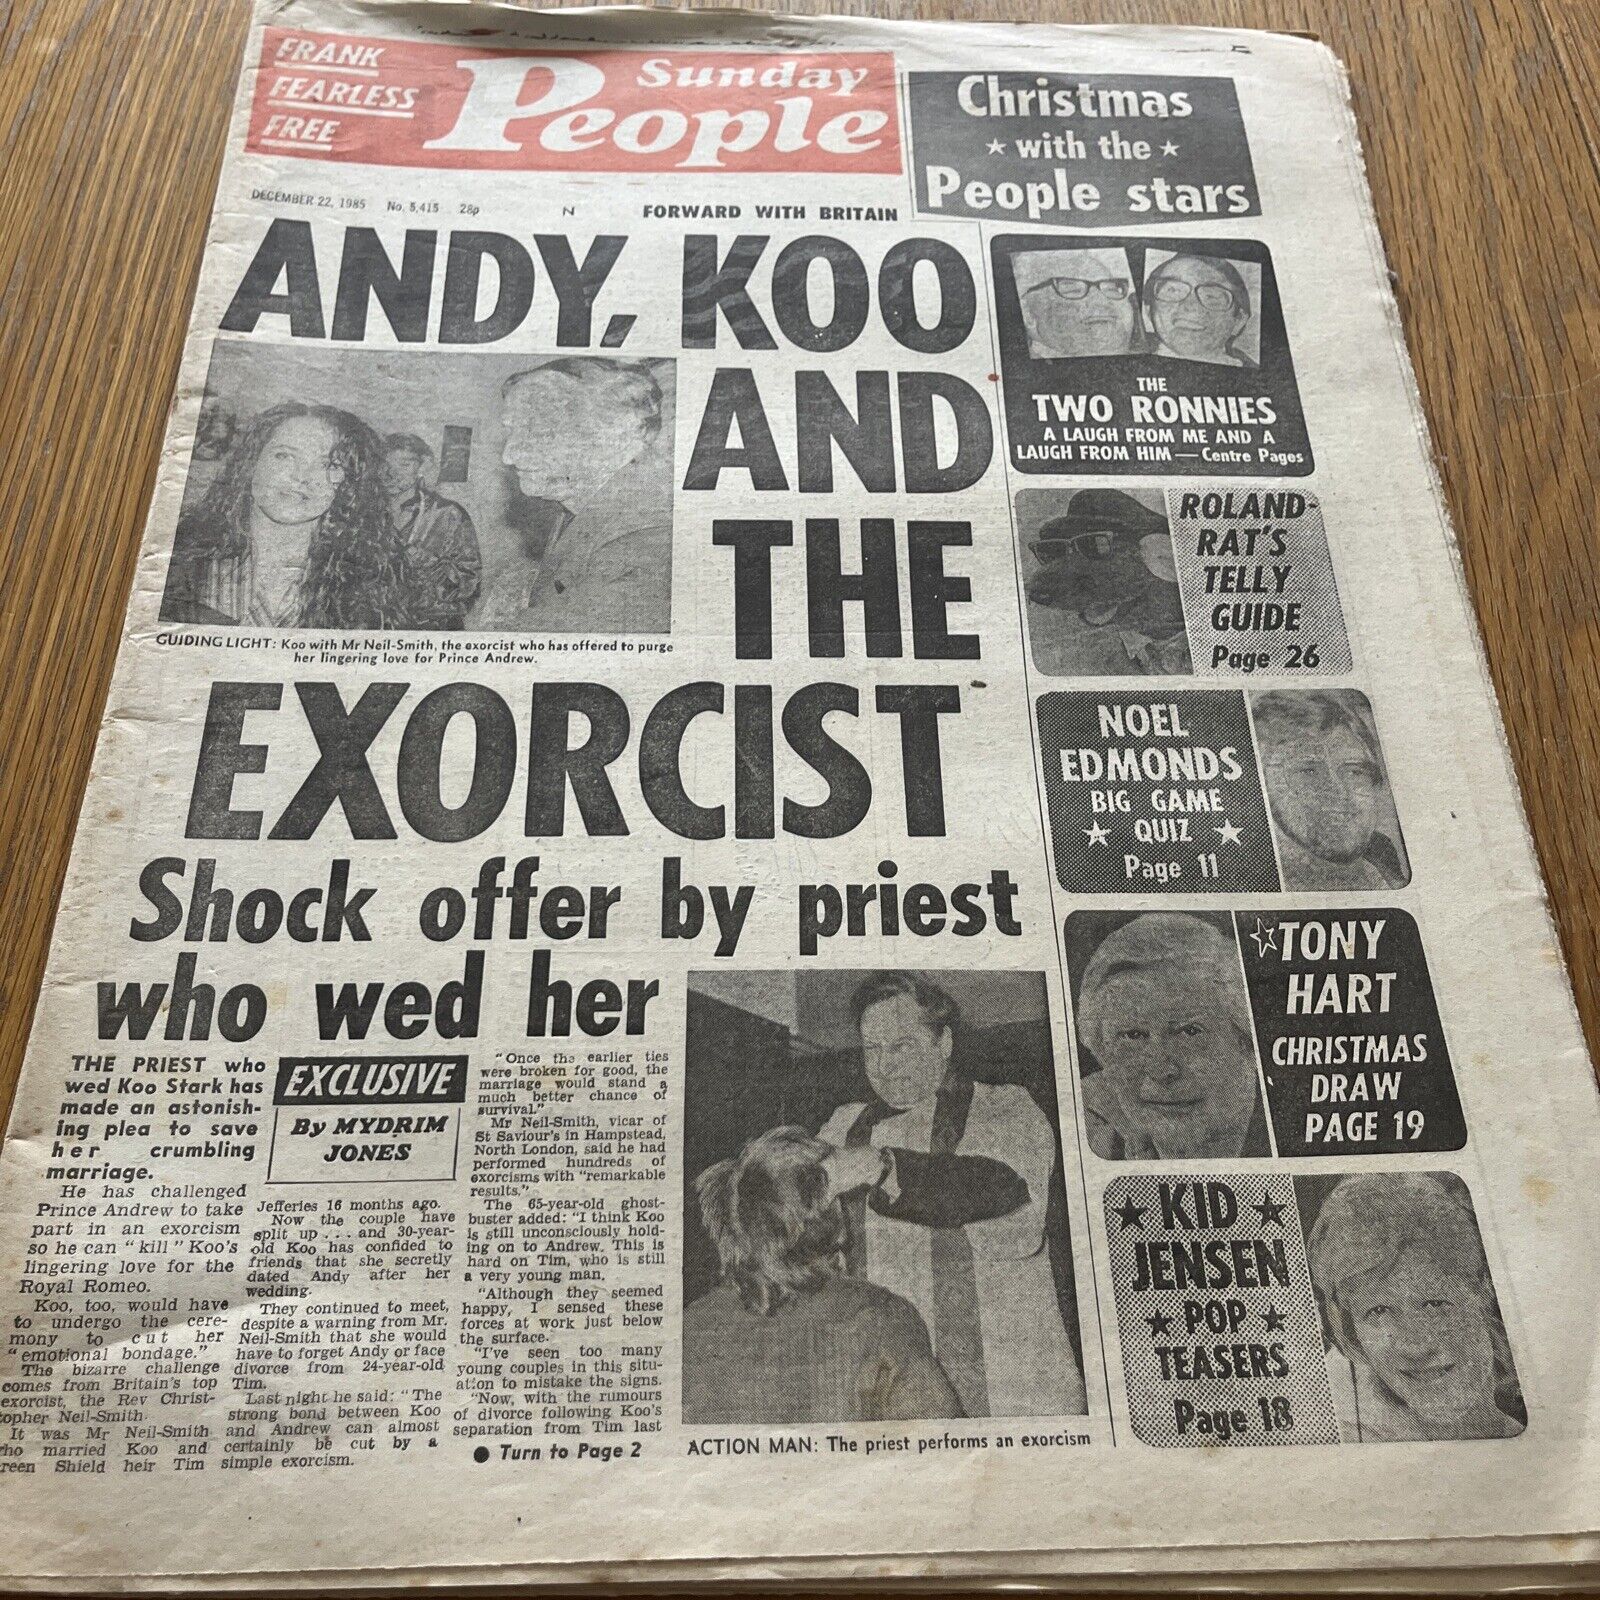 Sunday People Newspaper - December 22nd 1985 - “Andy, Koo And The Exorcist”